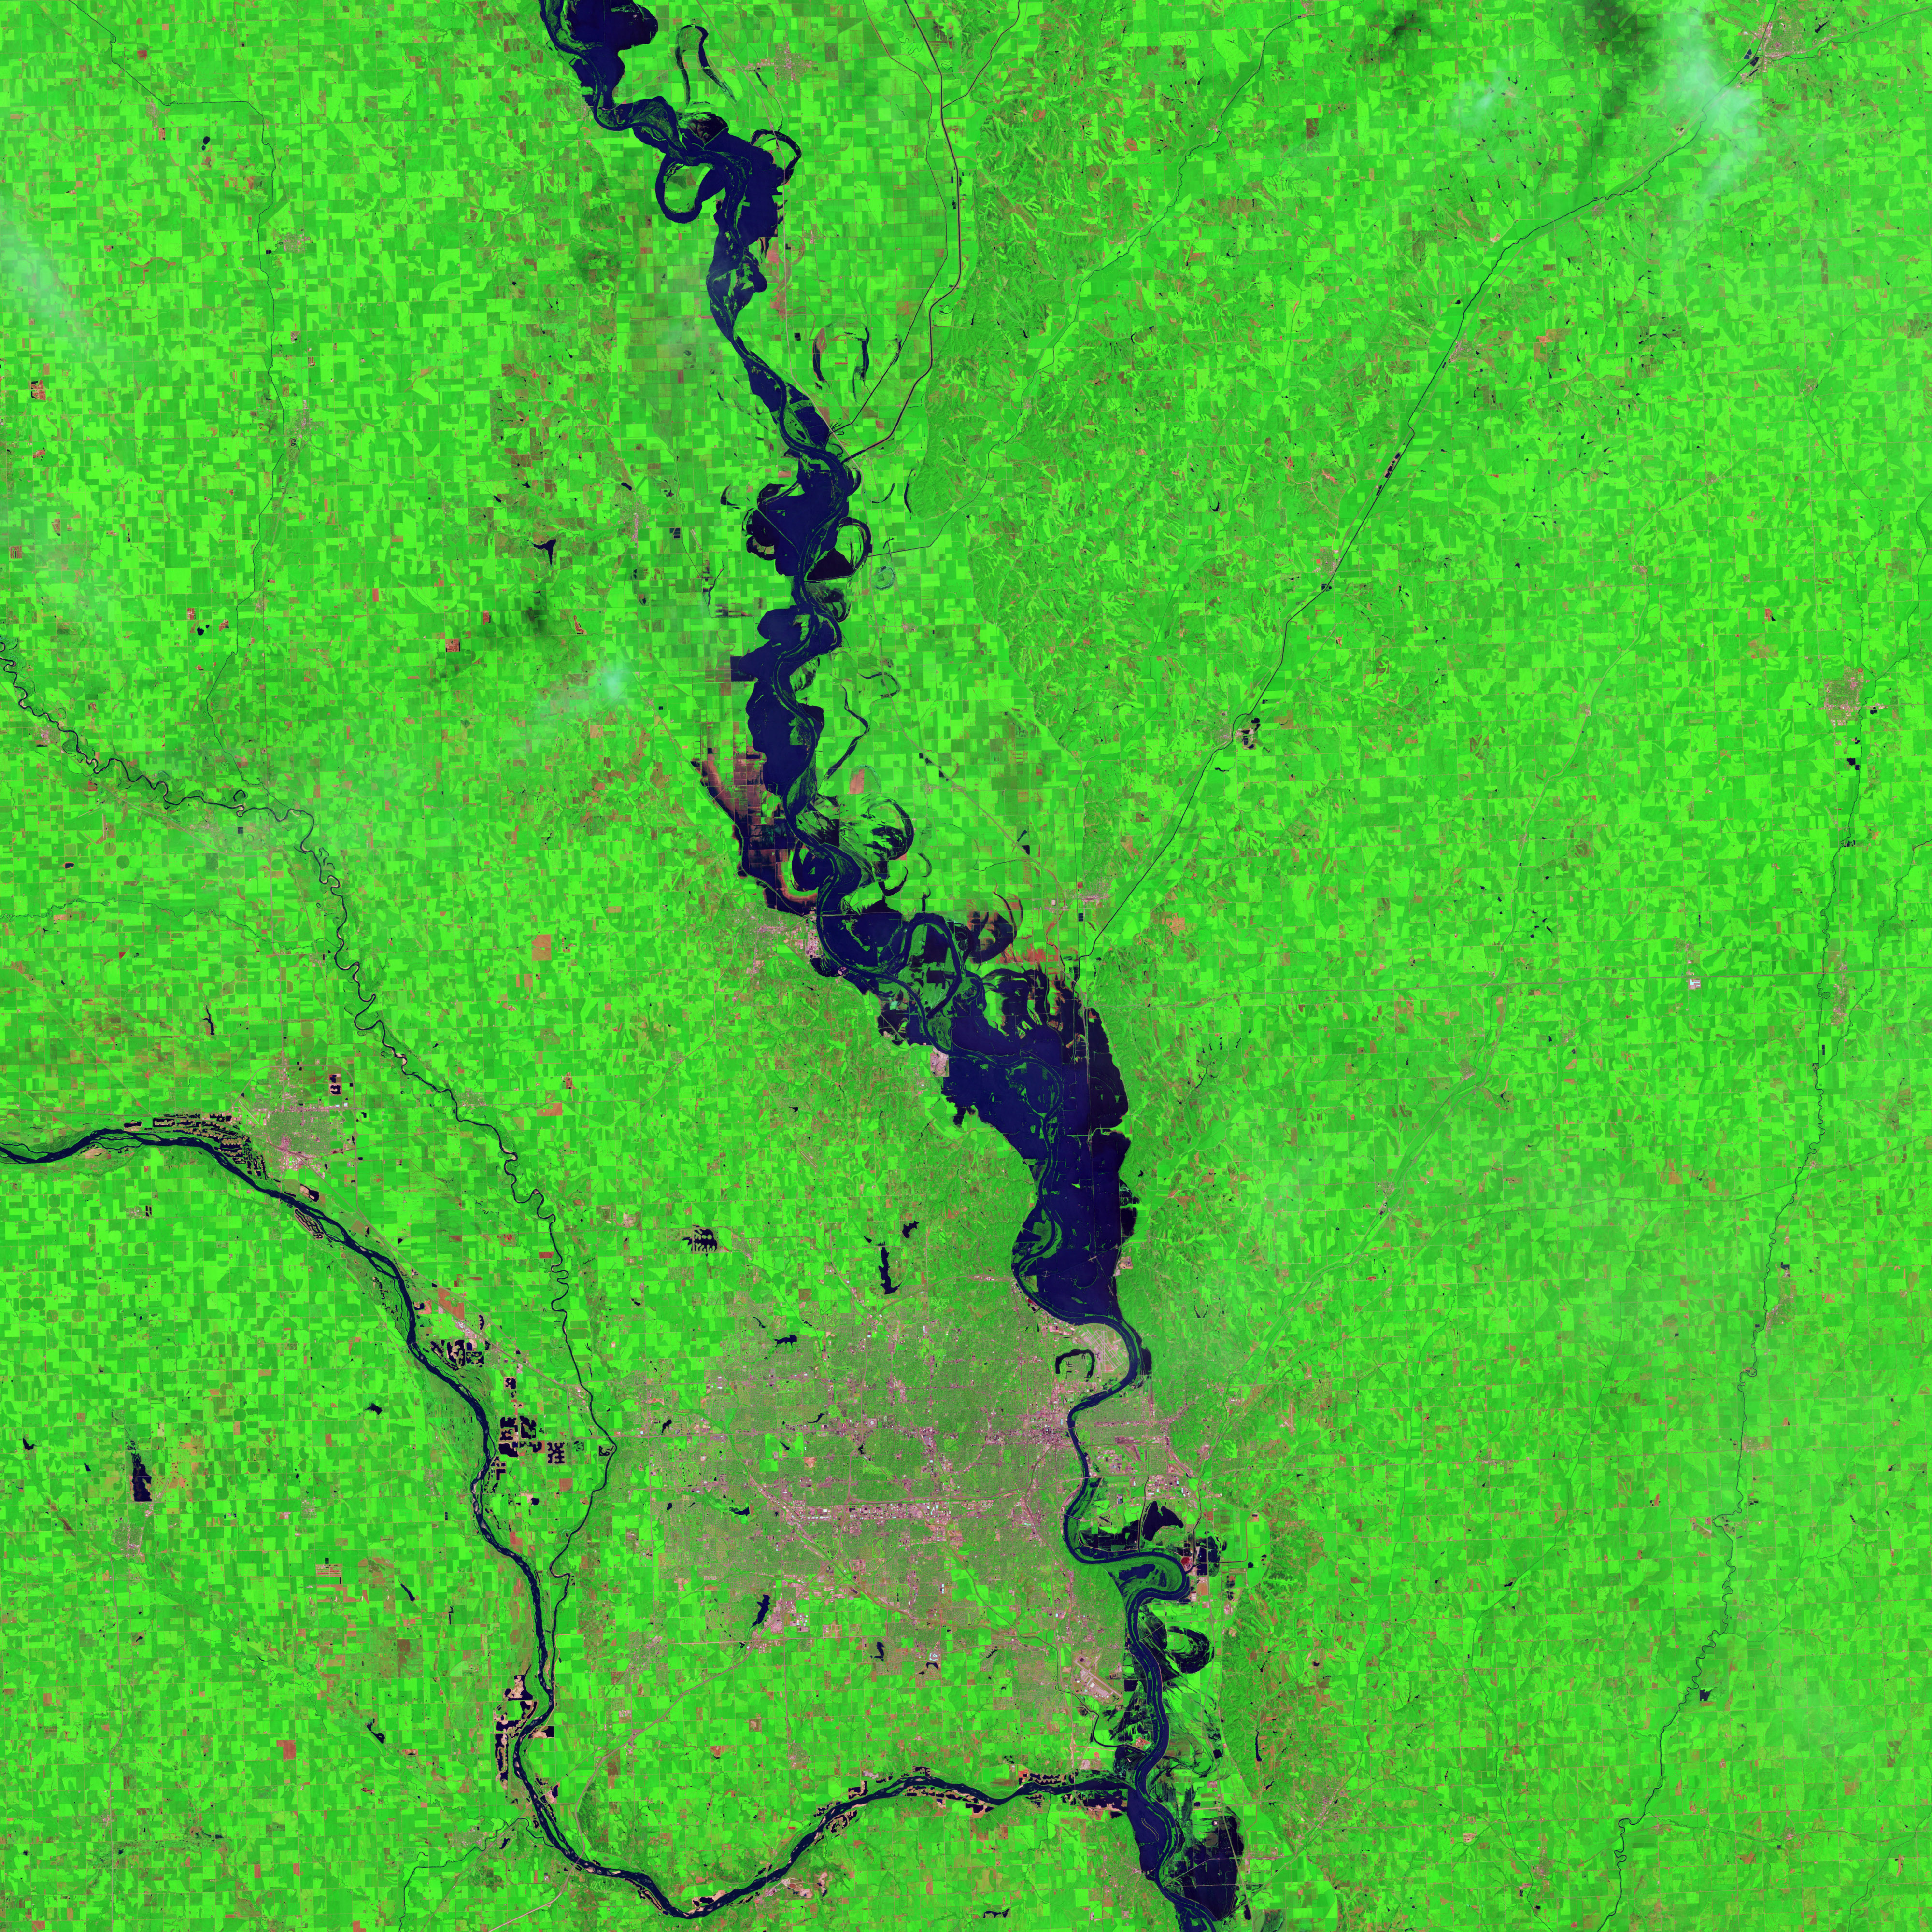 Flooding in the Missouri Basin - related image preview